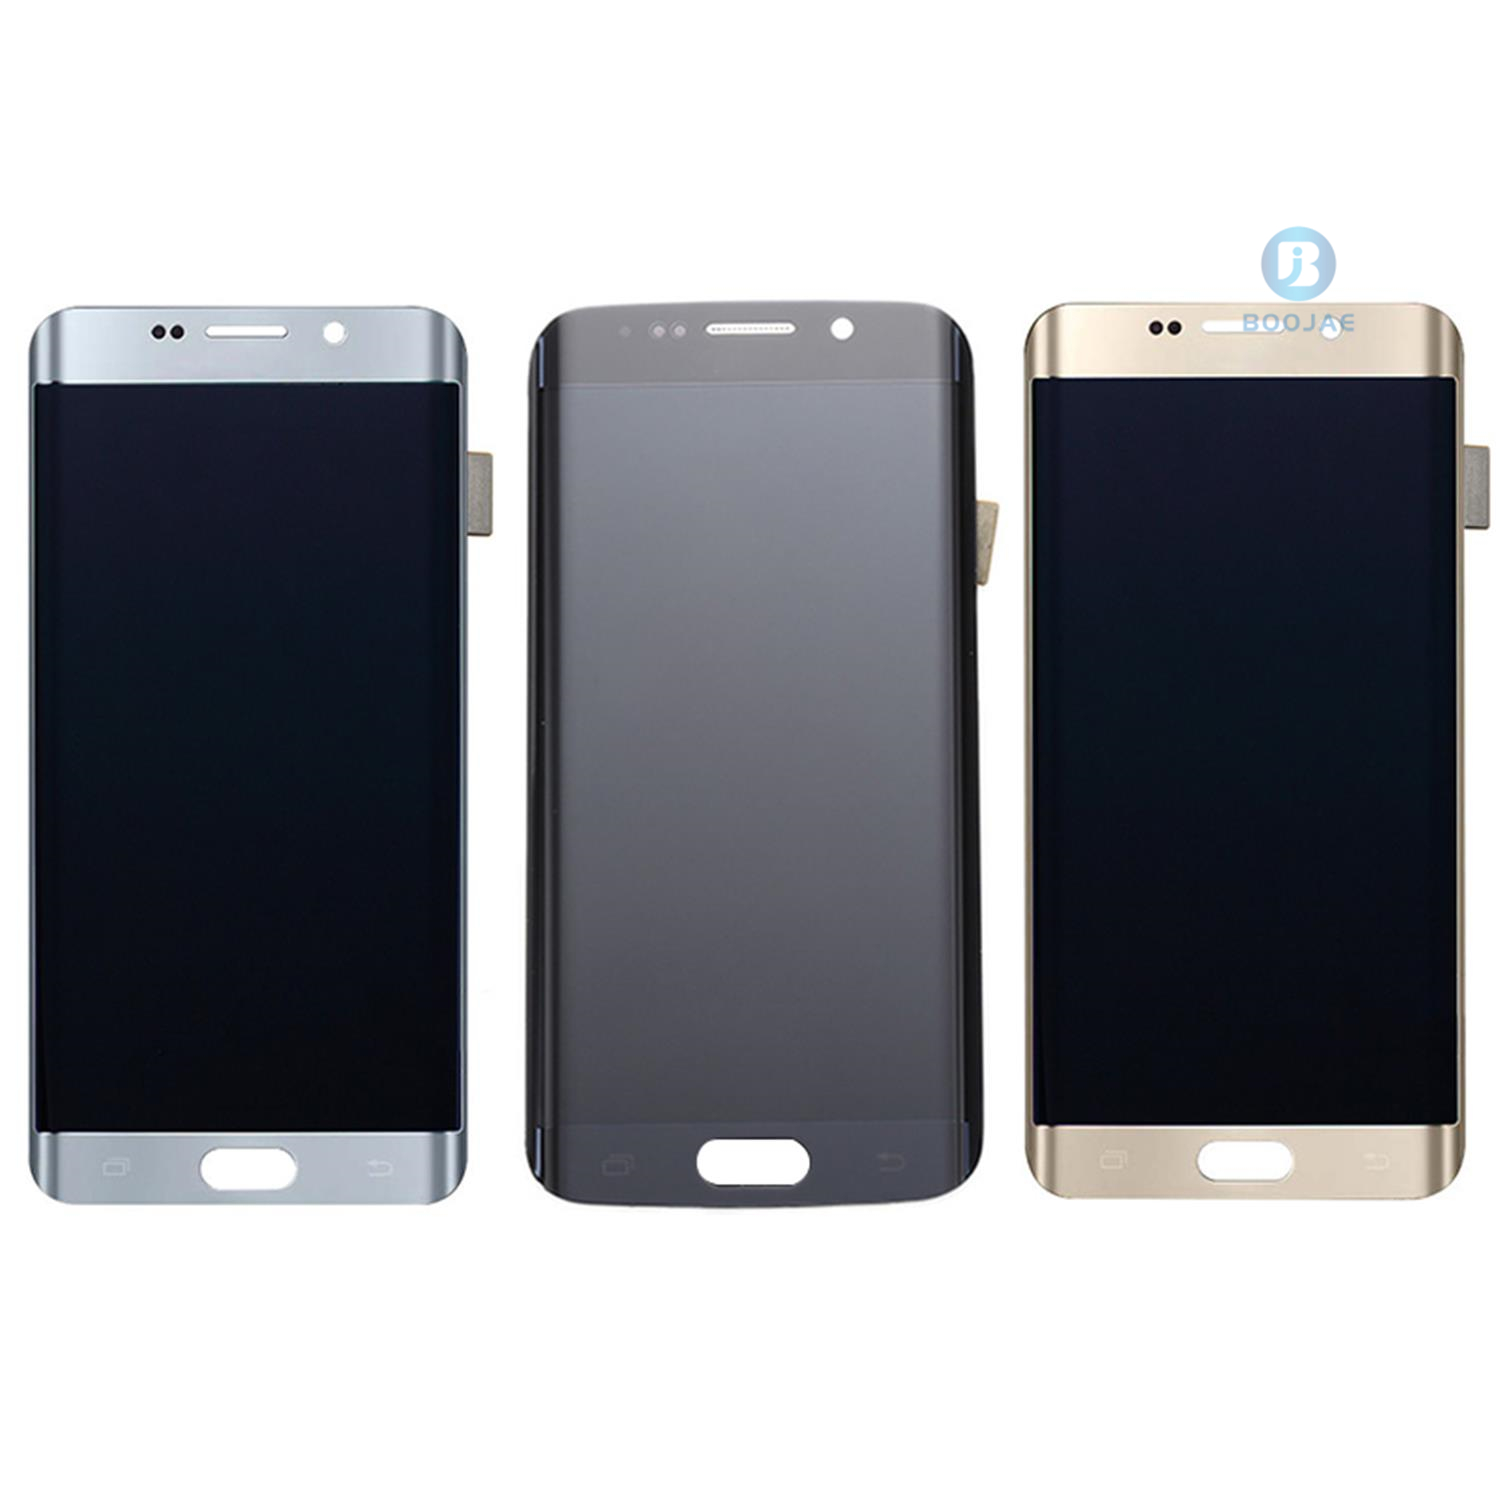 Samsung Galaxy S6 Edge Plus LCD Screen Display and Touch Panel Digitizer Assembly Replacement